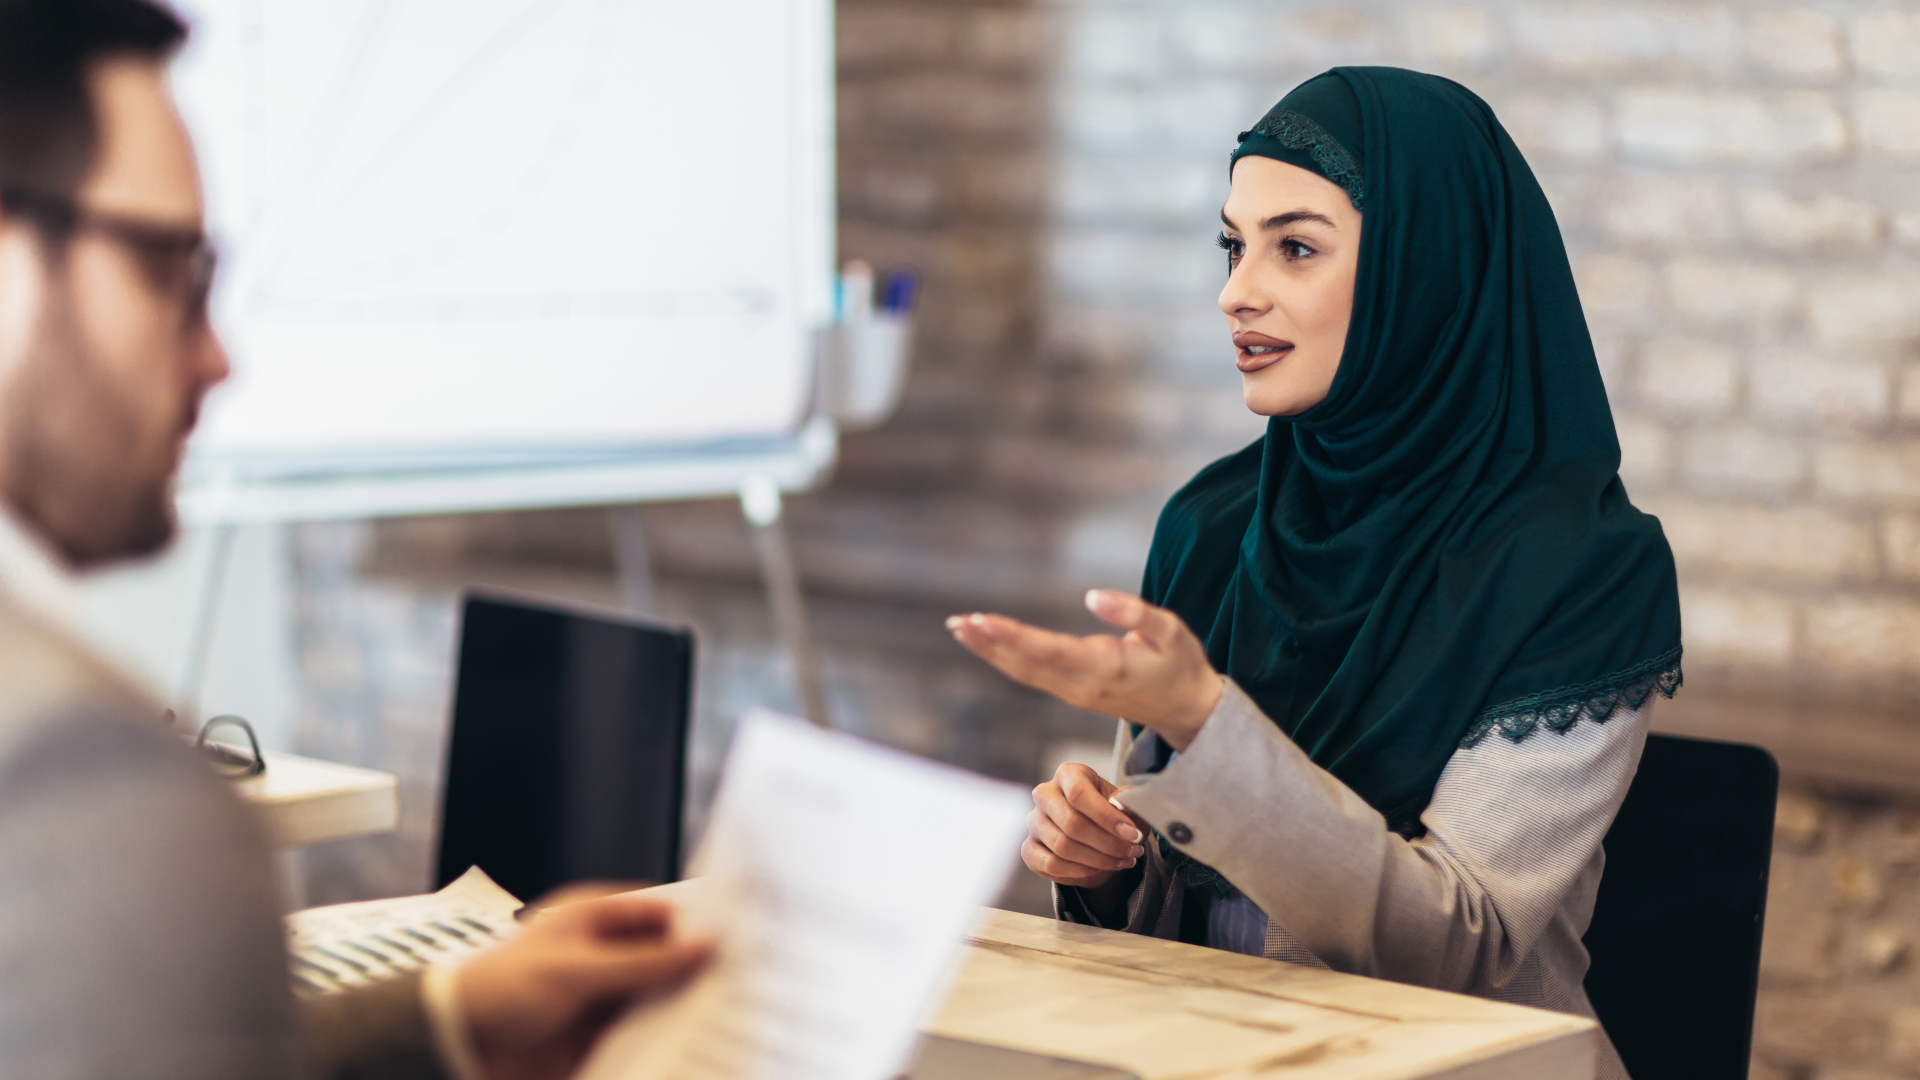 A female candidate (wearing a hijab) in a job interview in an office